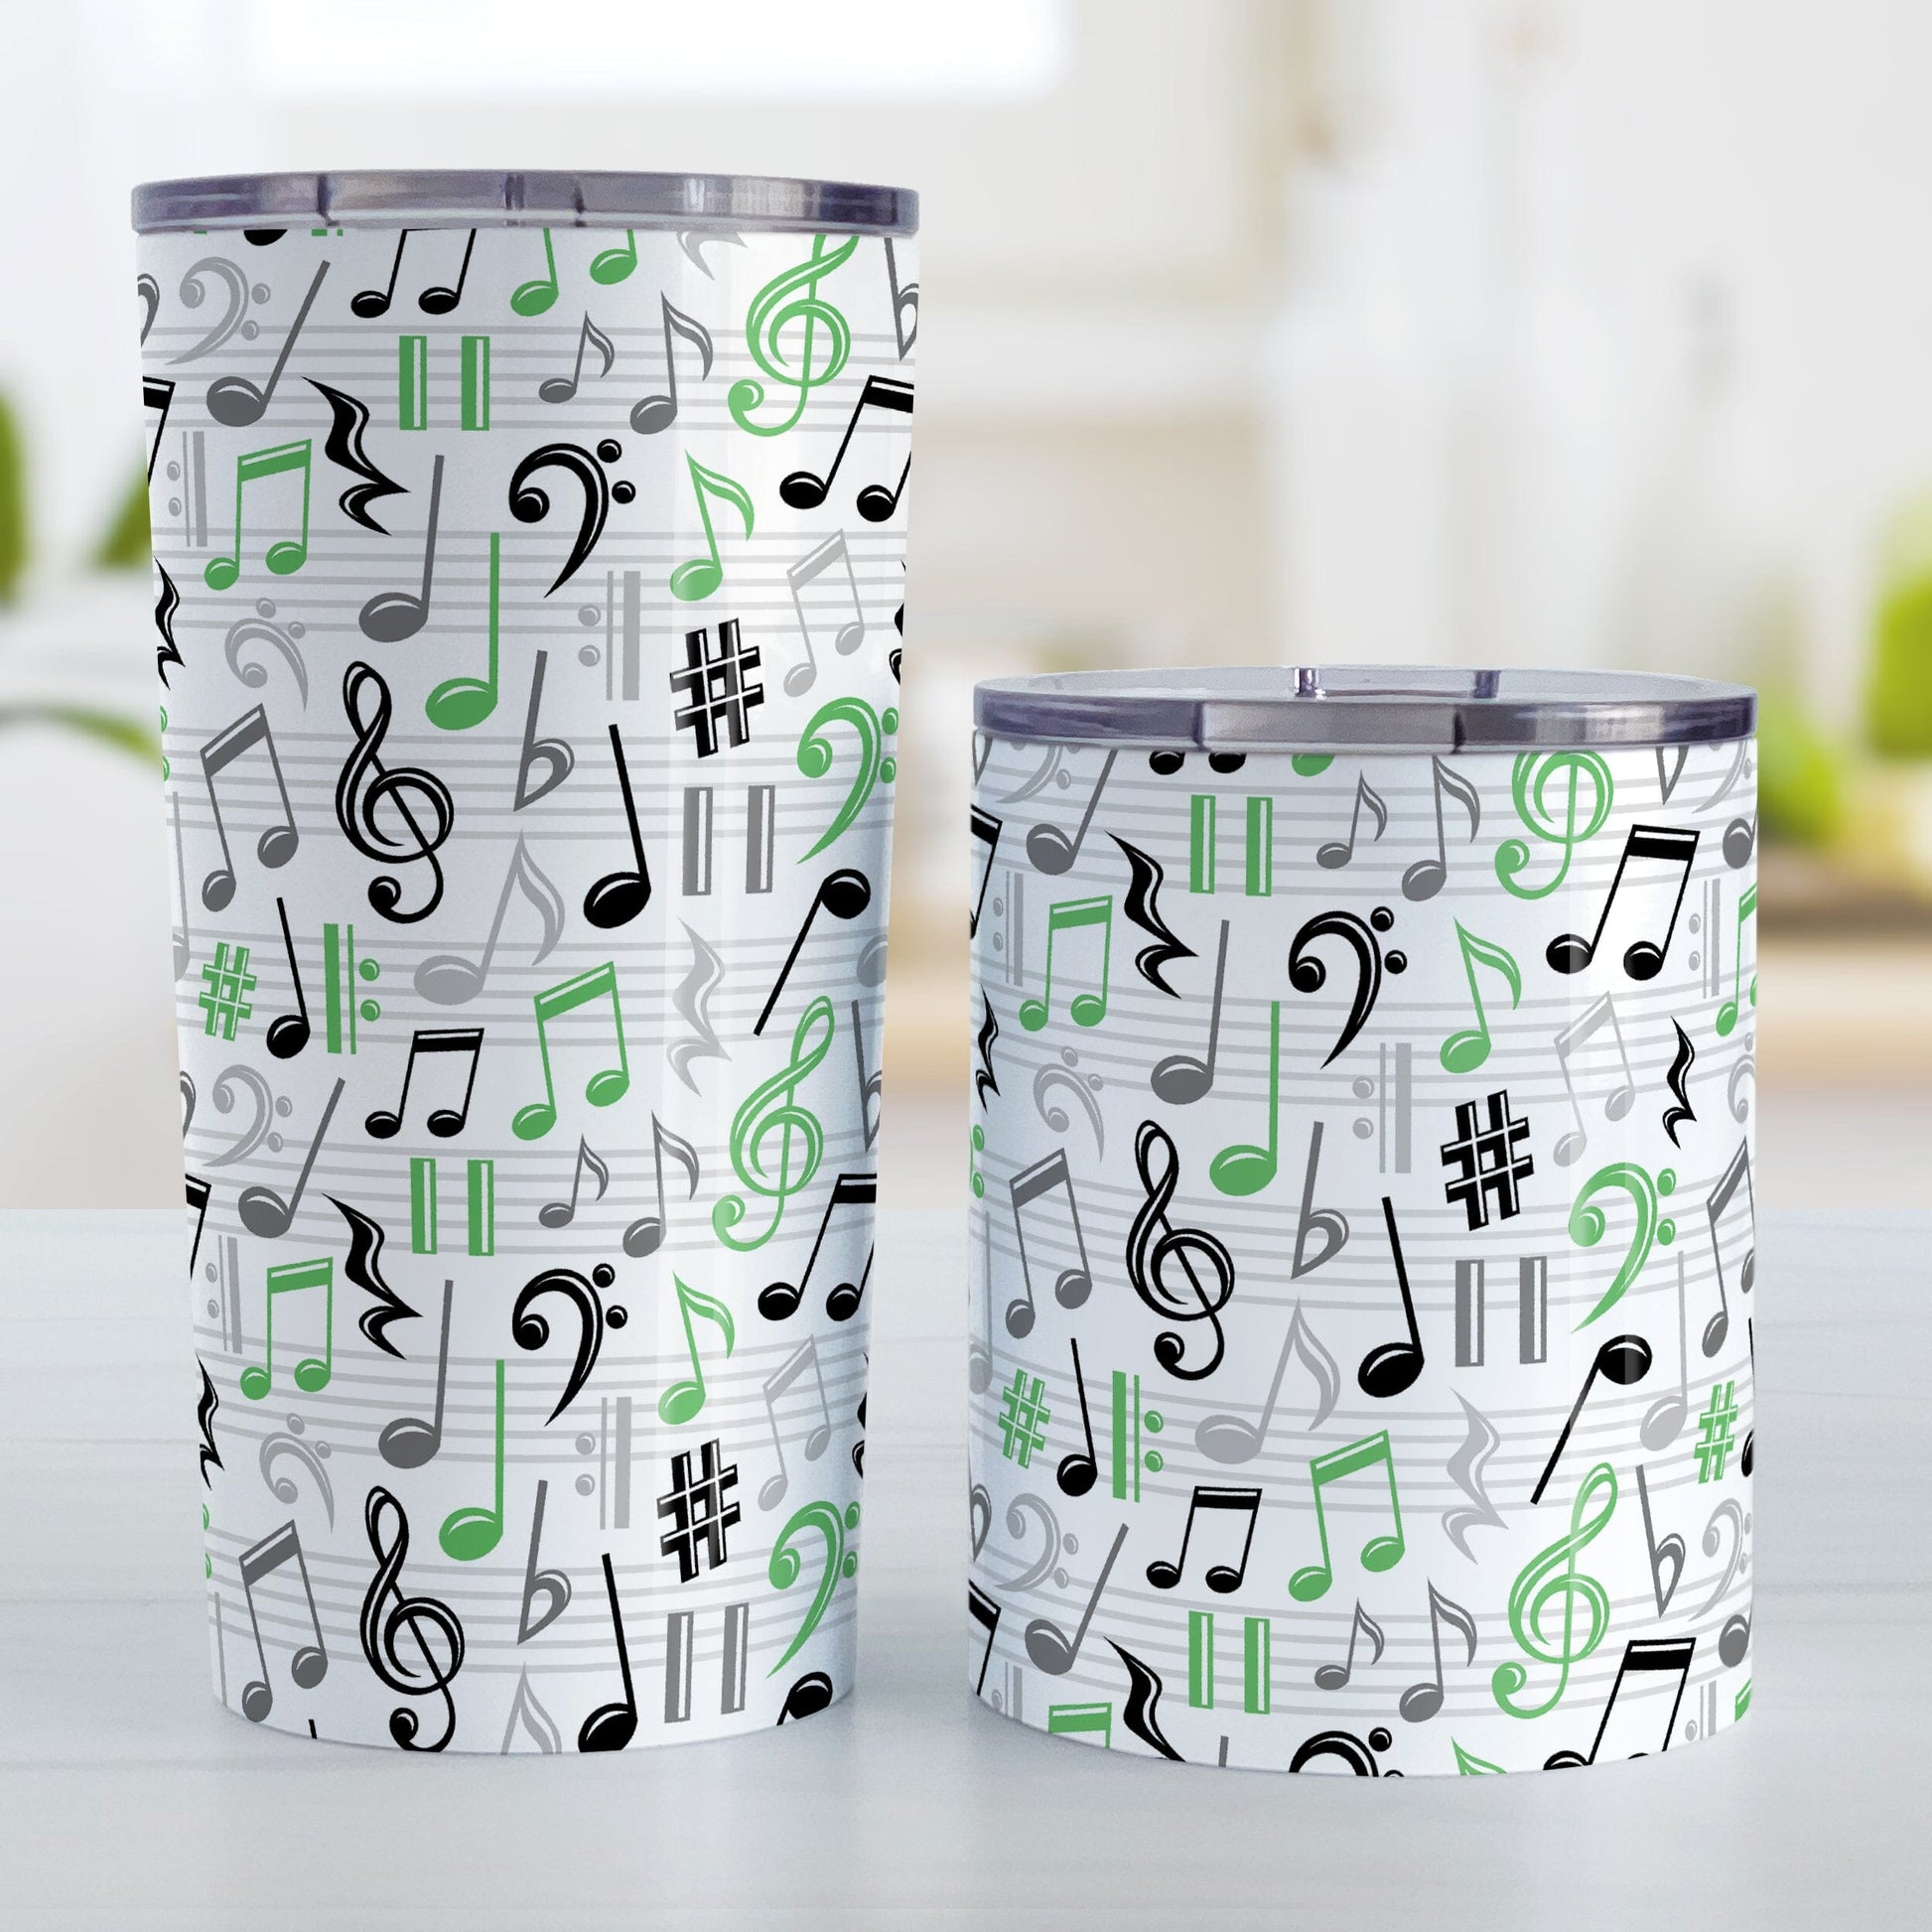 Green Music Notes Pattern Tumbler Cups (20oz or 10oz) at Amy's Coffee Mugs. Stainless steel tumbler cups designed with music notes and symbols in green, black, and gray in a pattern that wraps around the cups. Photo shows both sized cups on a table next to each other. 